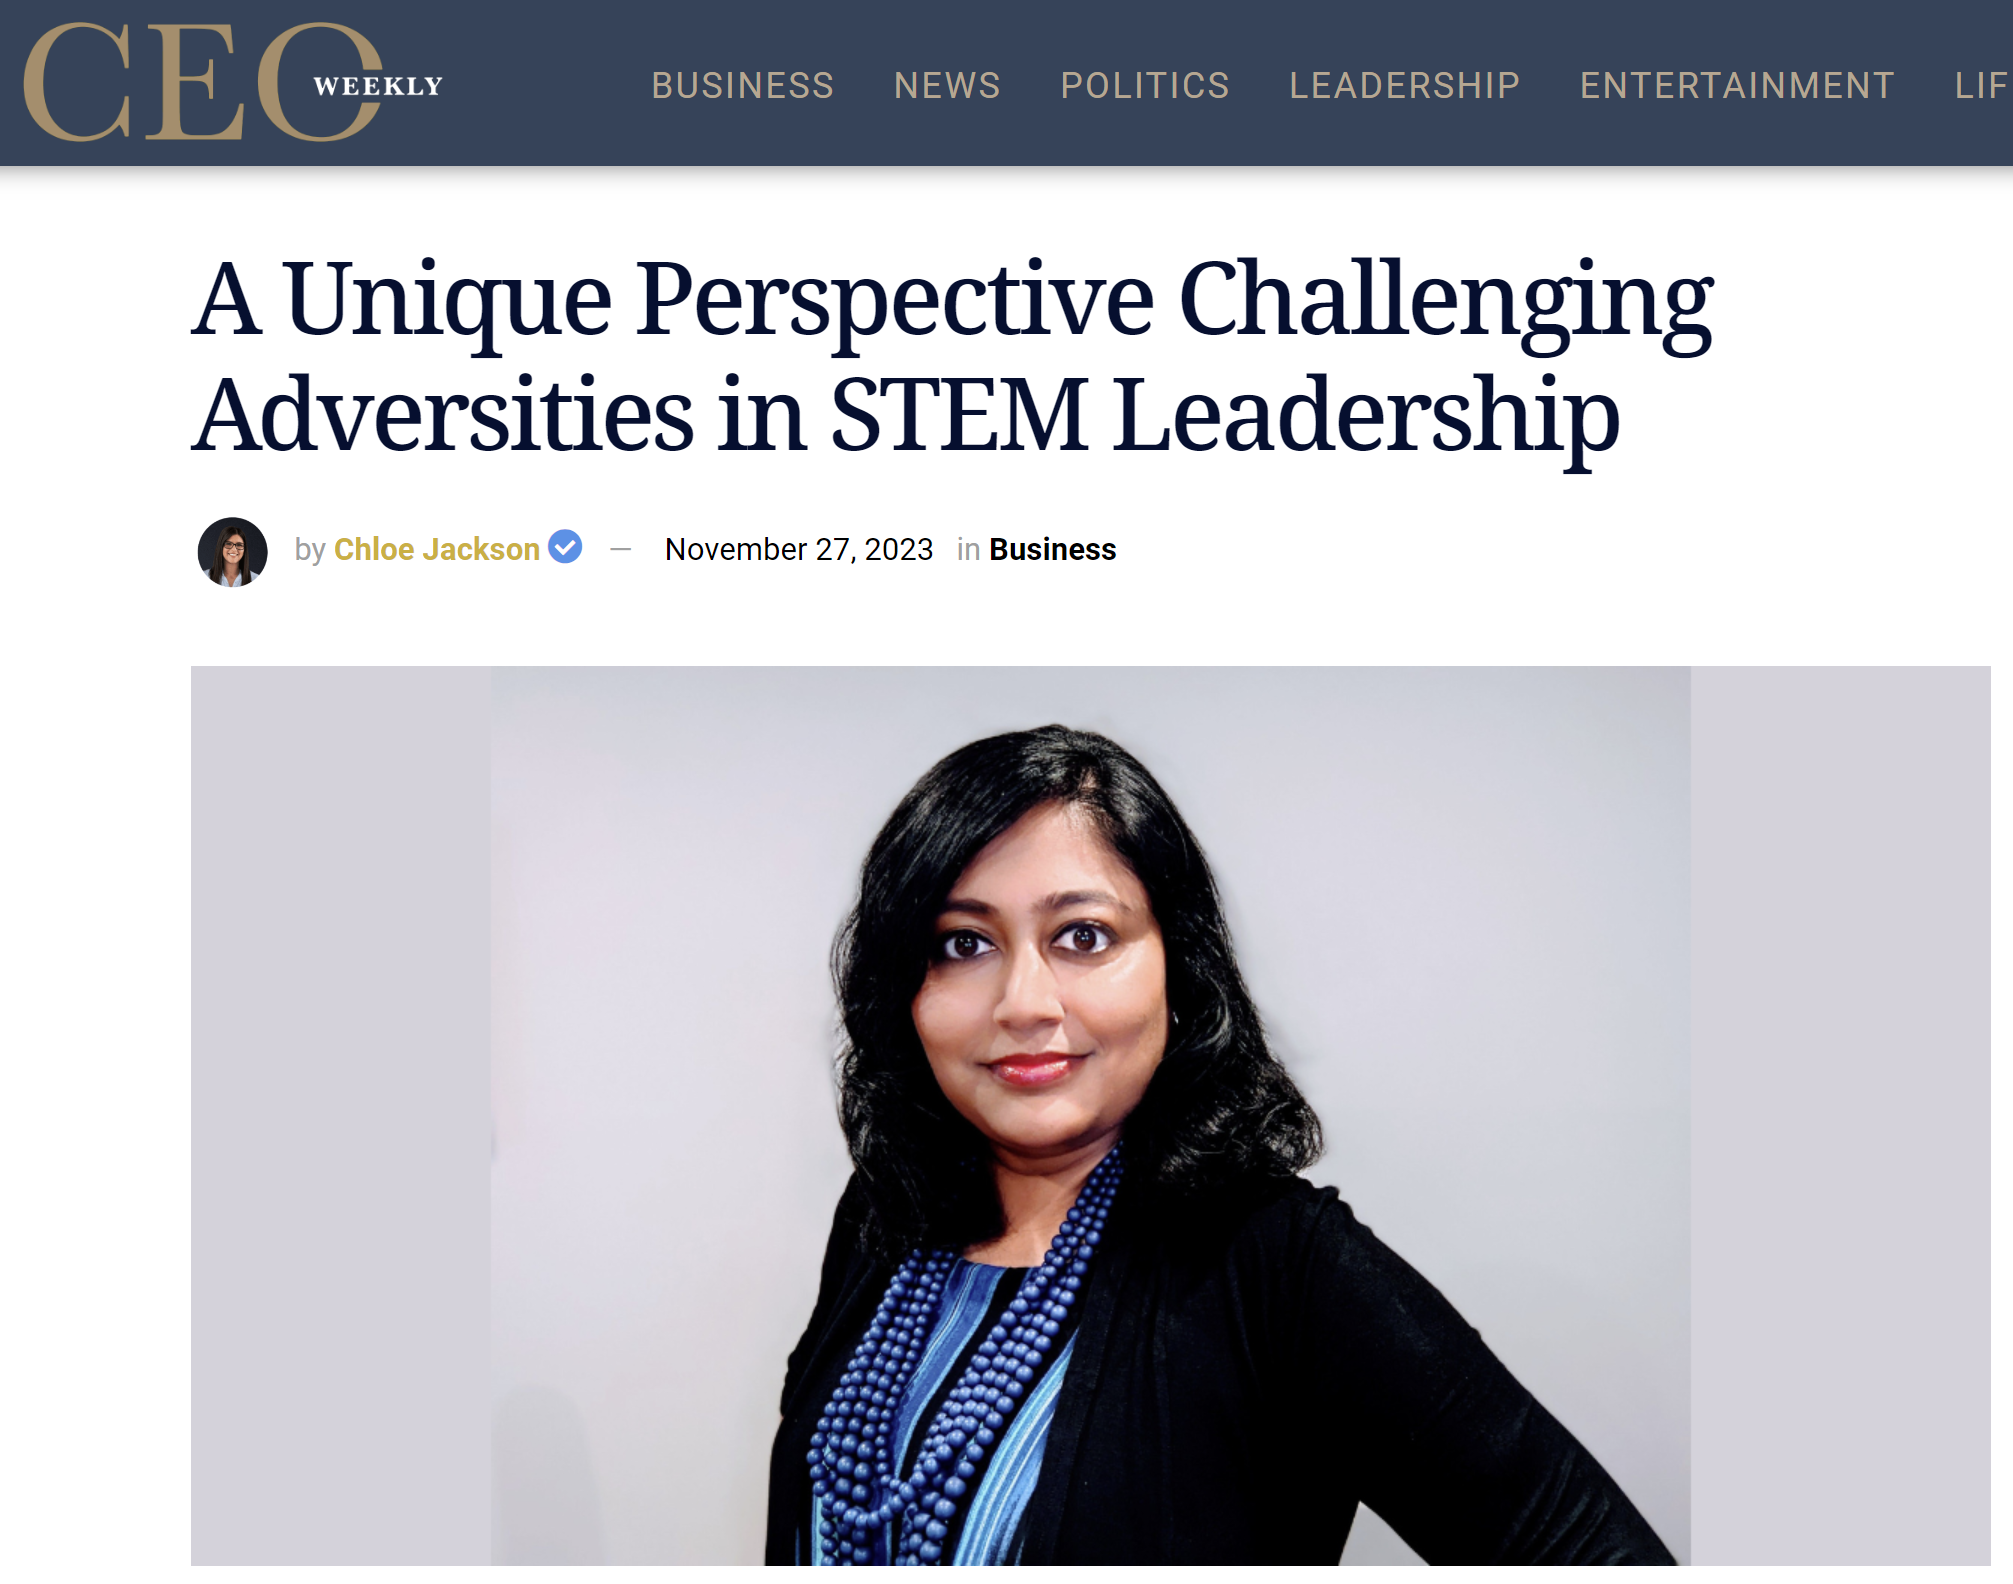 A Unique Perspective Challenging Adversities in STEM Leadership